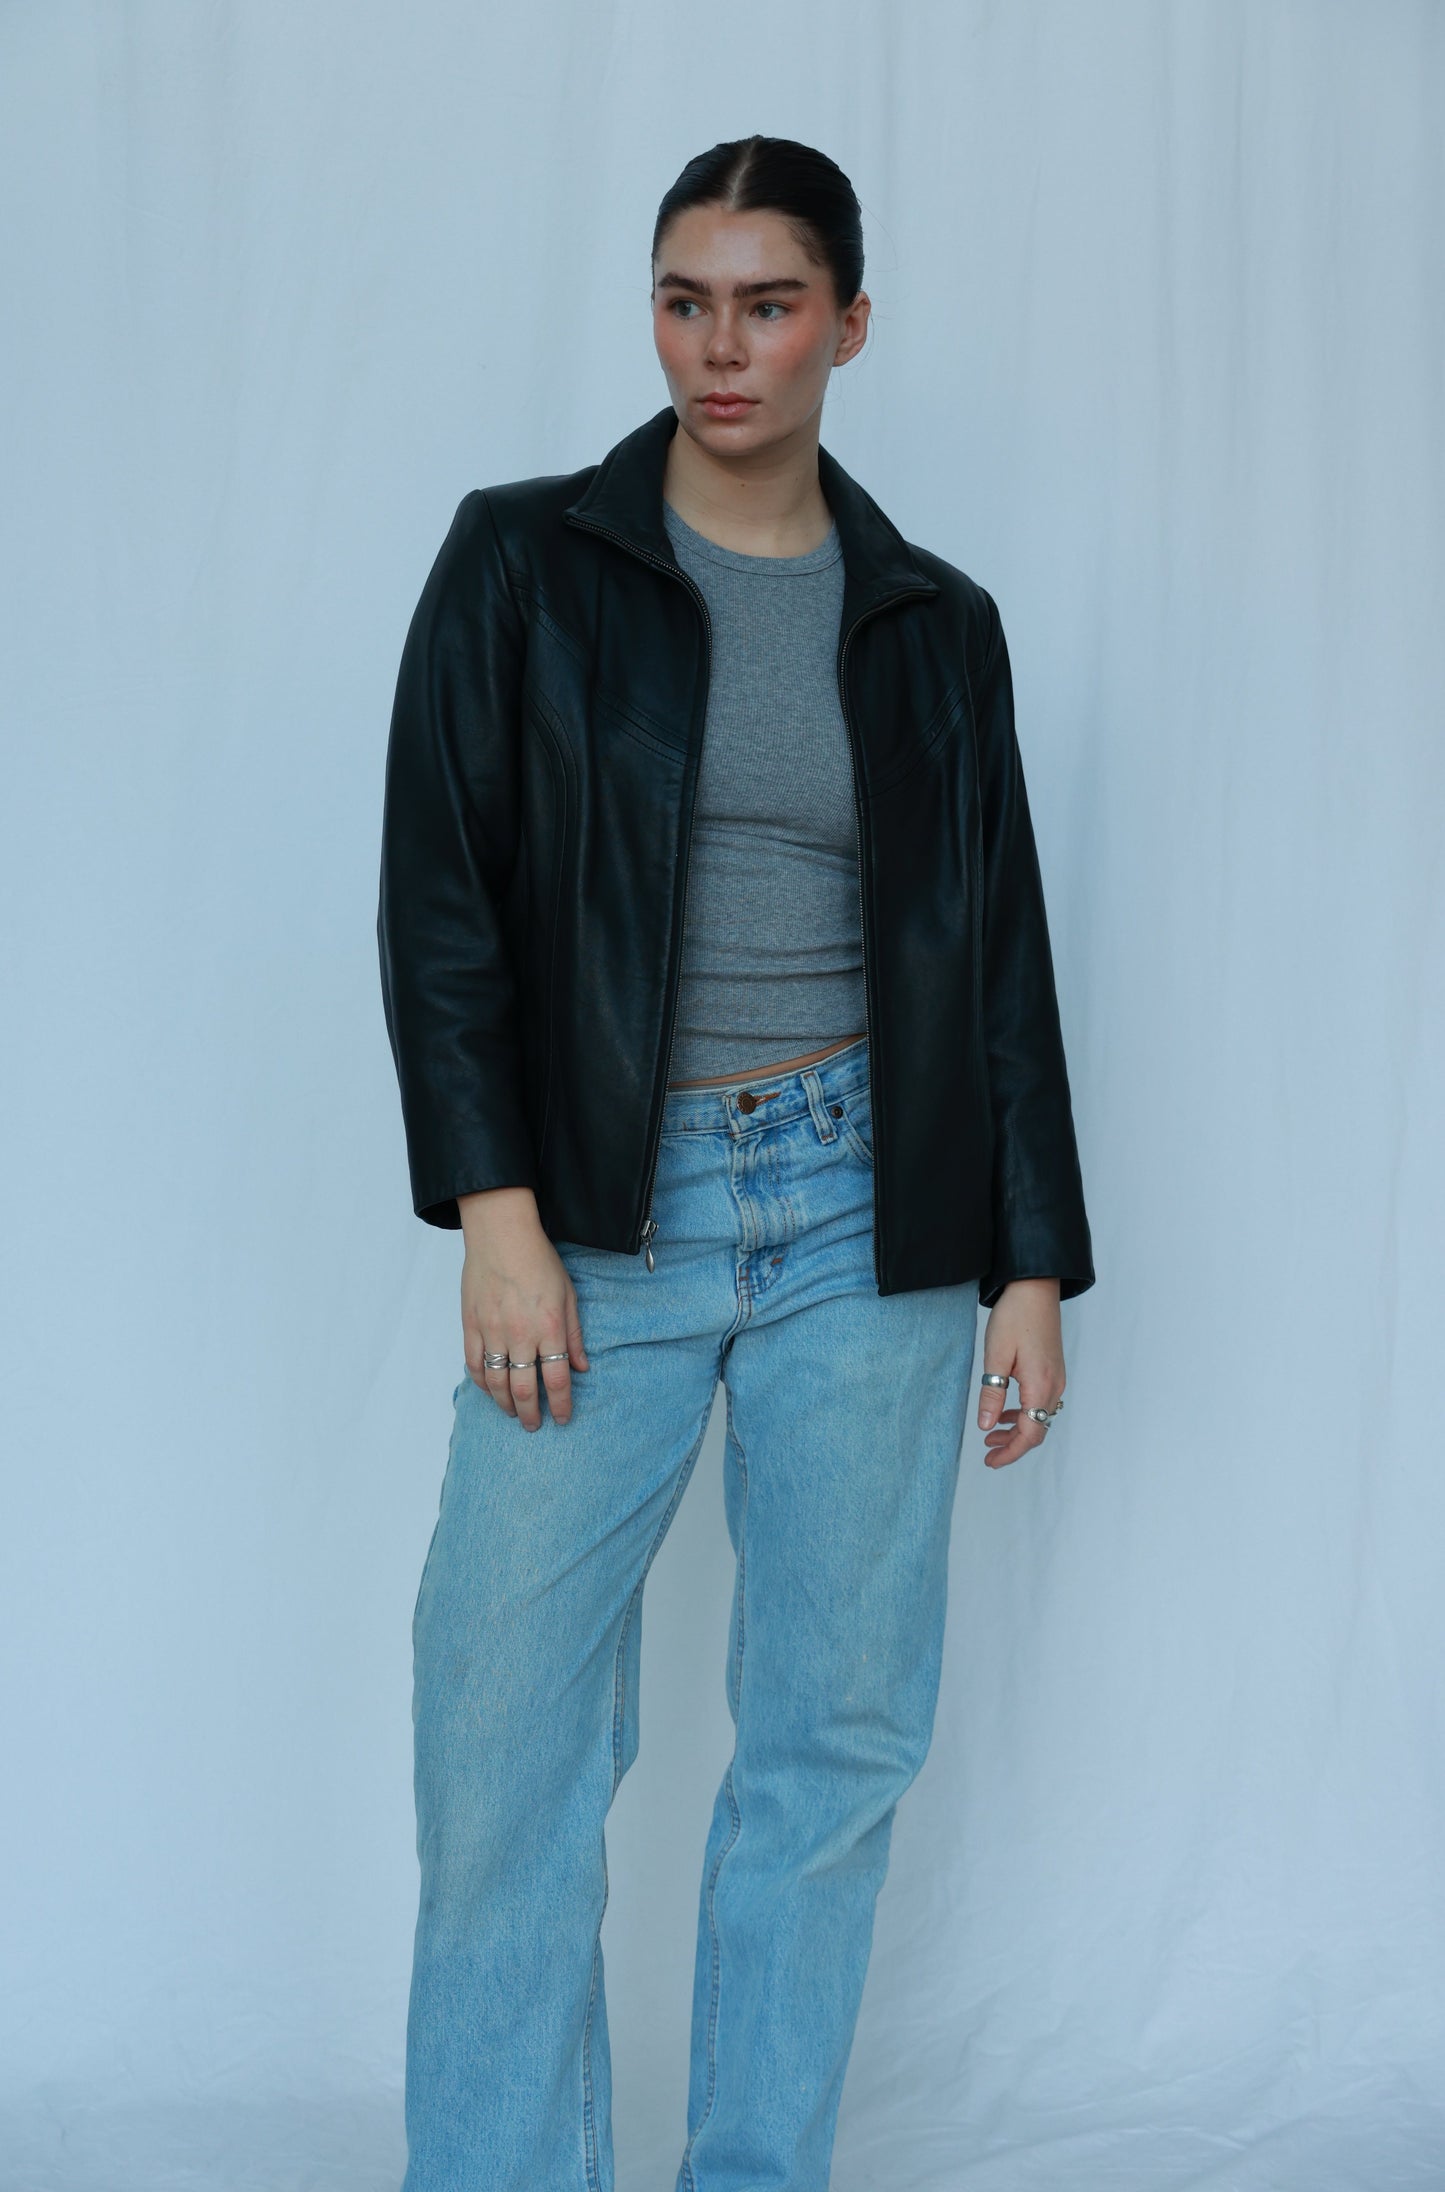 The image features a girl standing against a white backdrop. She's wearing a stylish black leather jacket over a grey tank top, paired with classic blue jeans. The ensemble exudes a trendy and casual vibe, creating a fashionable yet comfortable look.